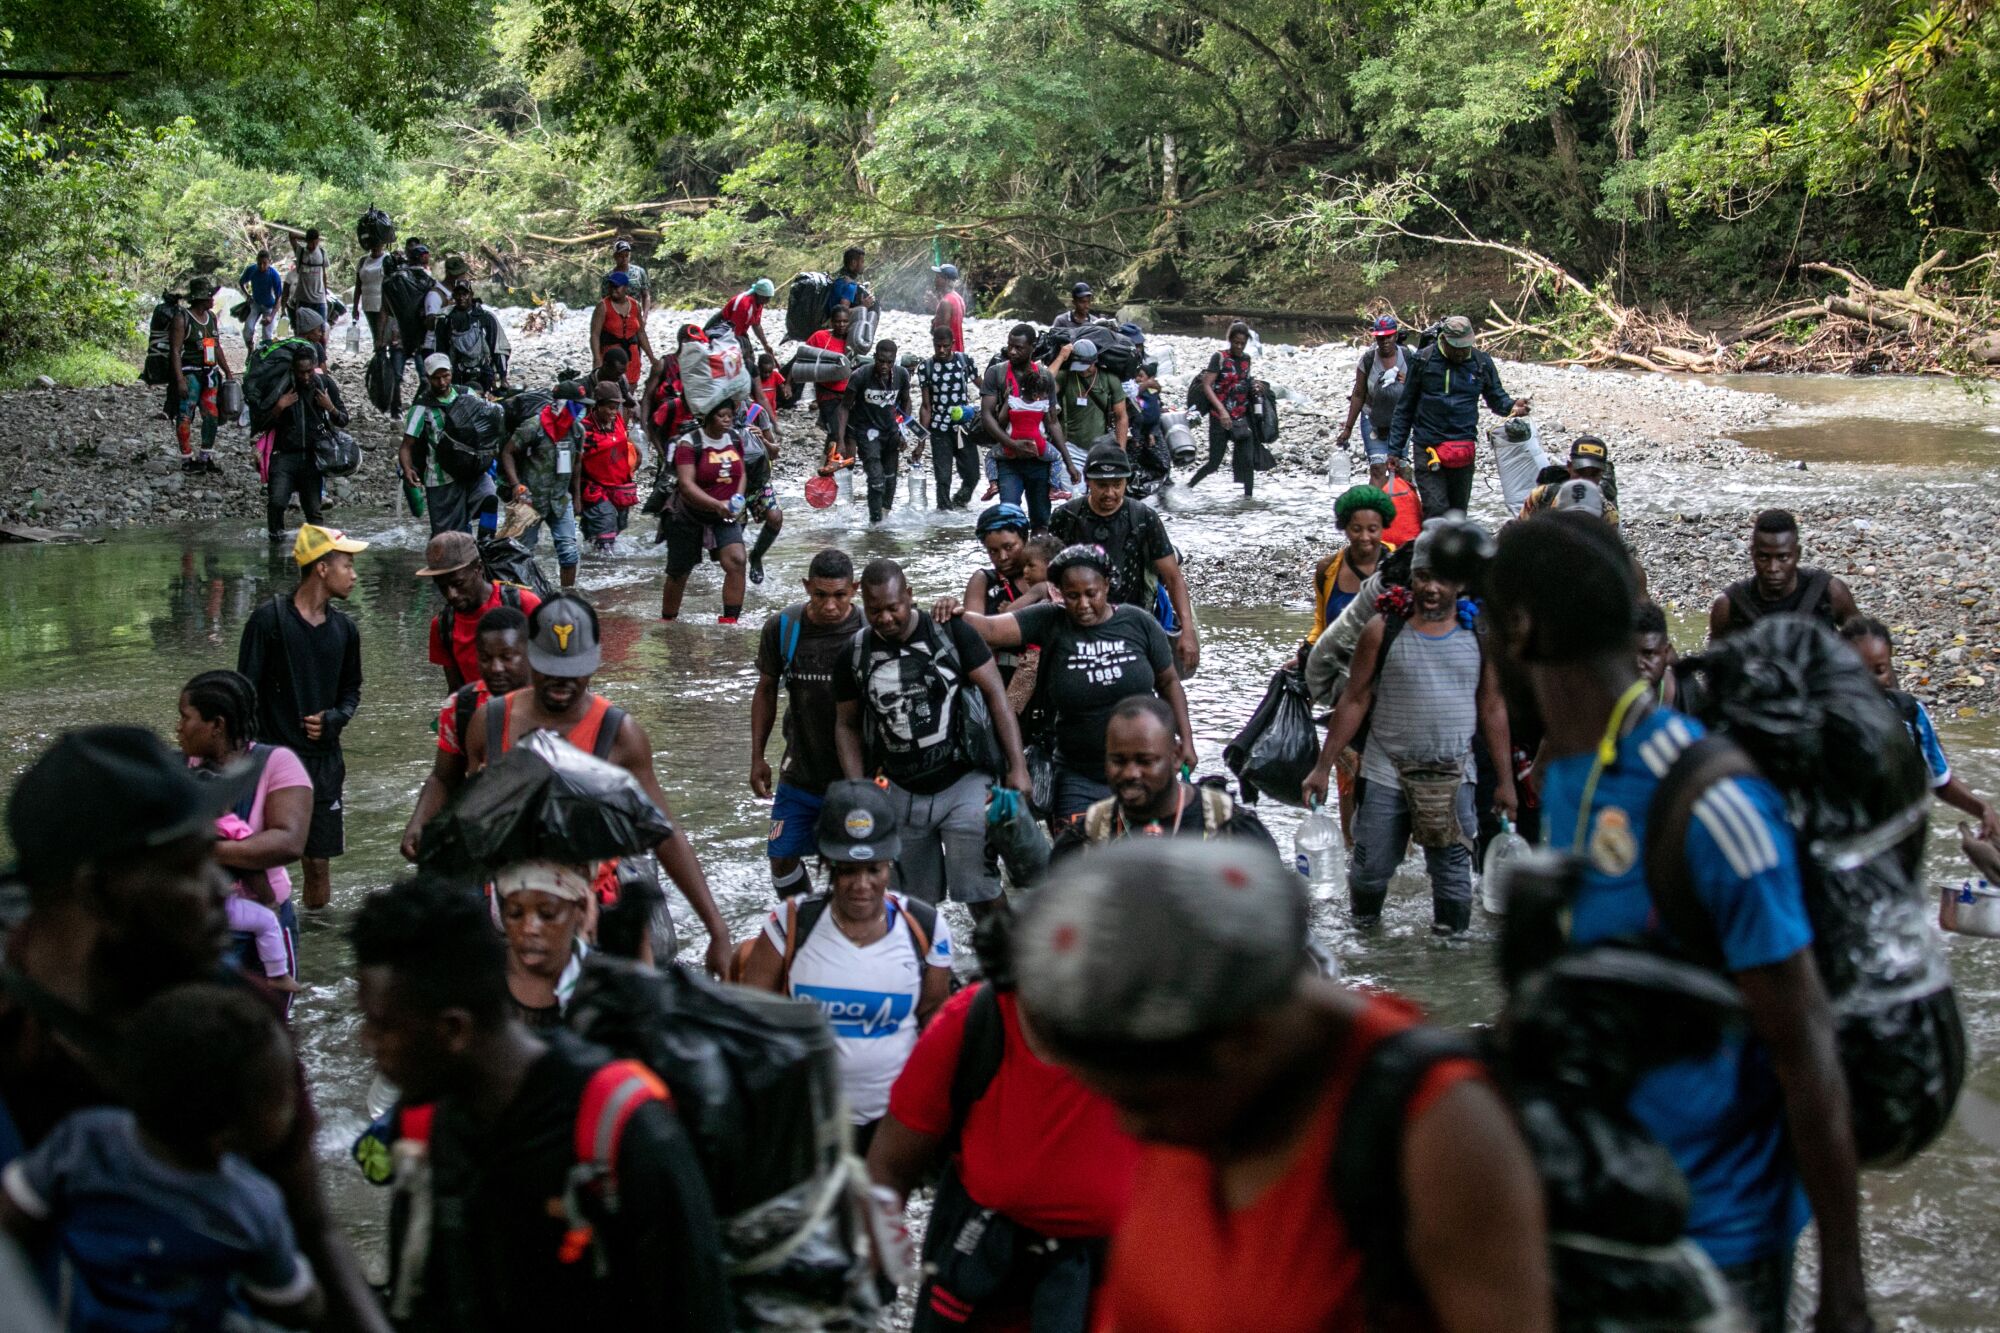 Migrants, most from Haiti, ford one of many rivers they will cross while on a trek through the infamous Darien Gap.